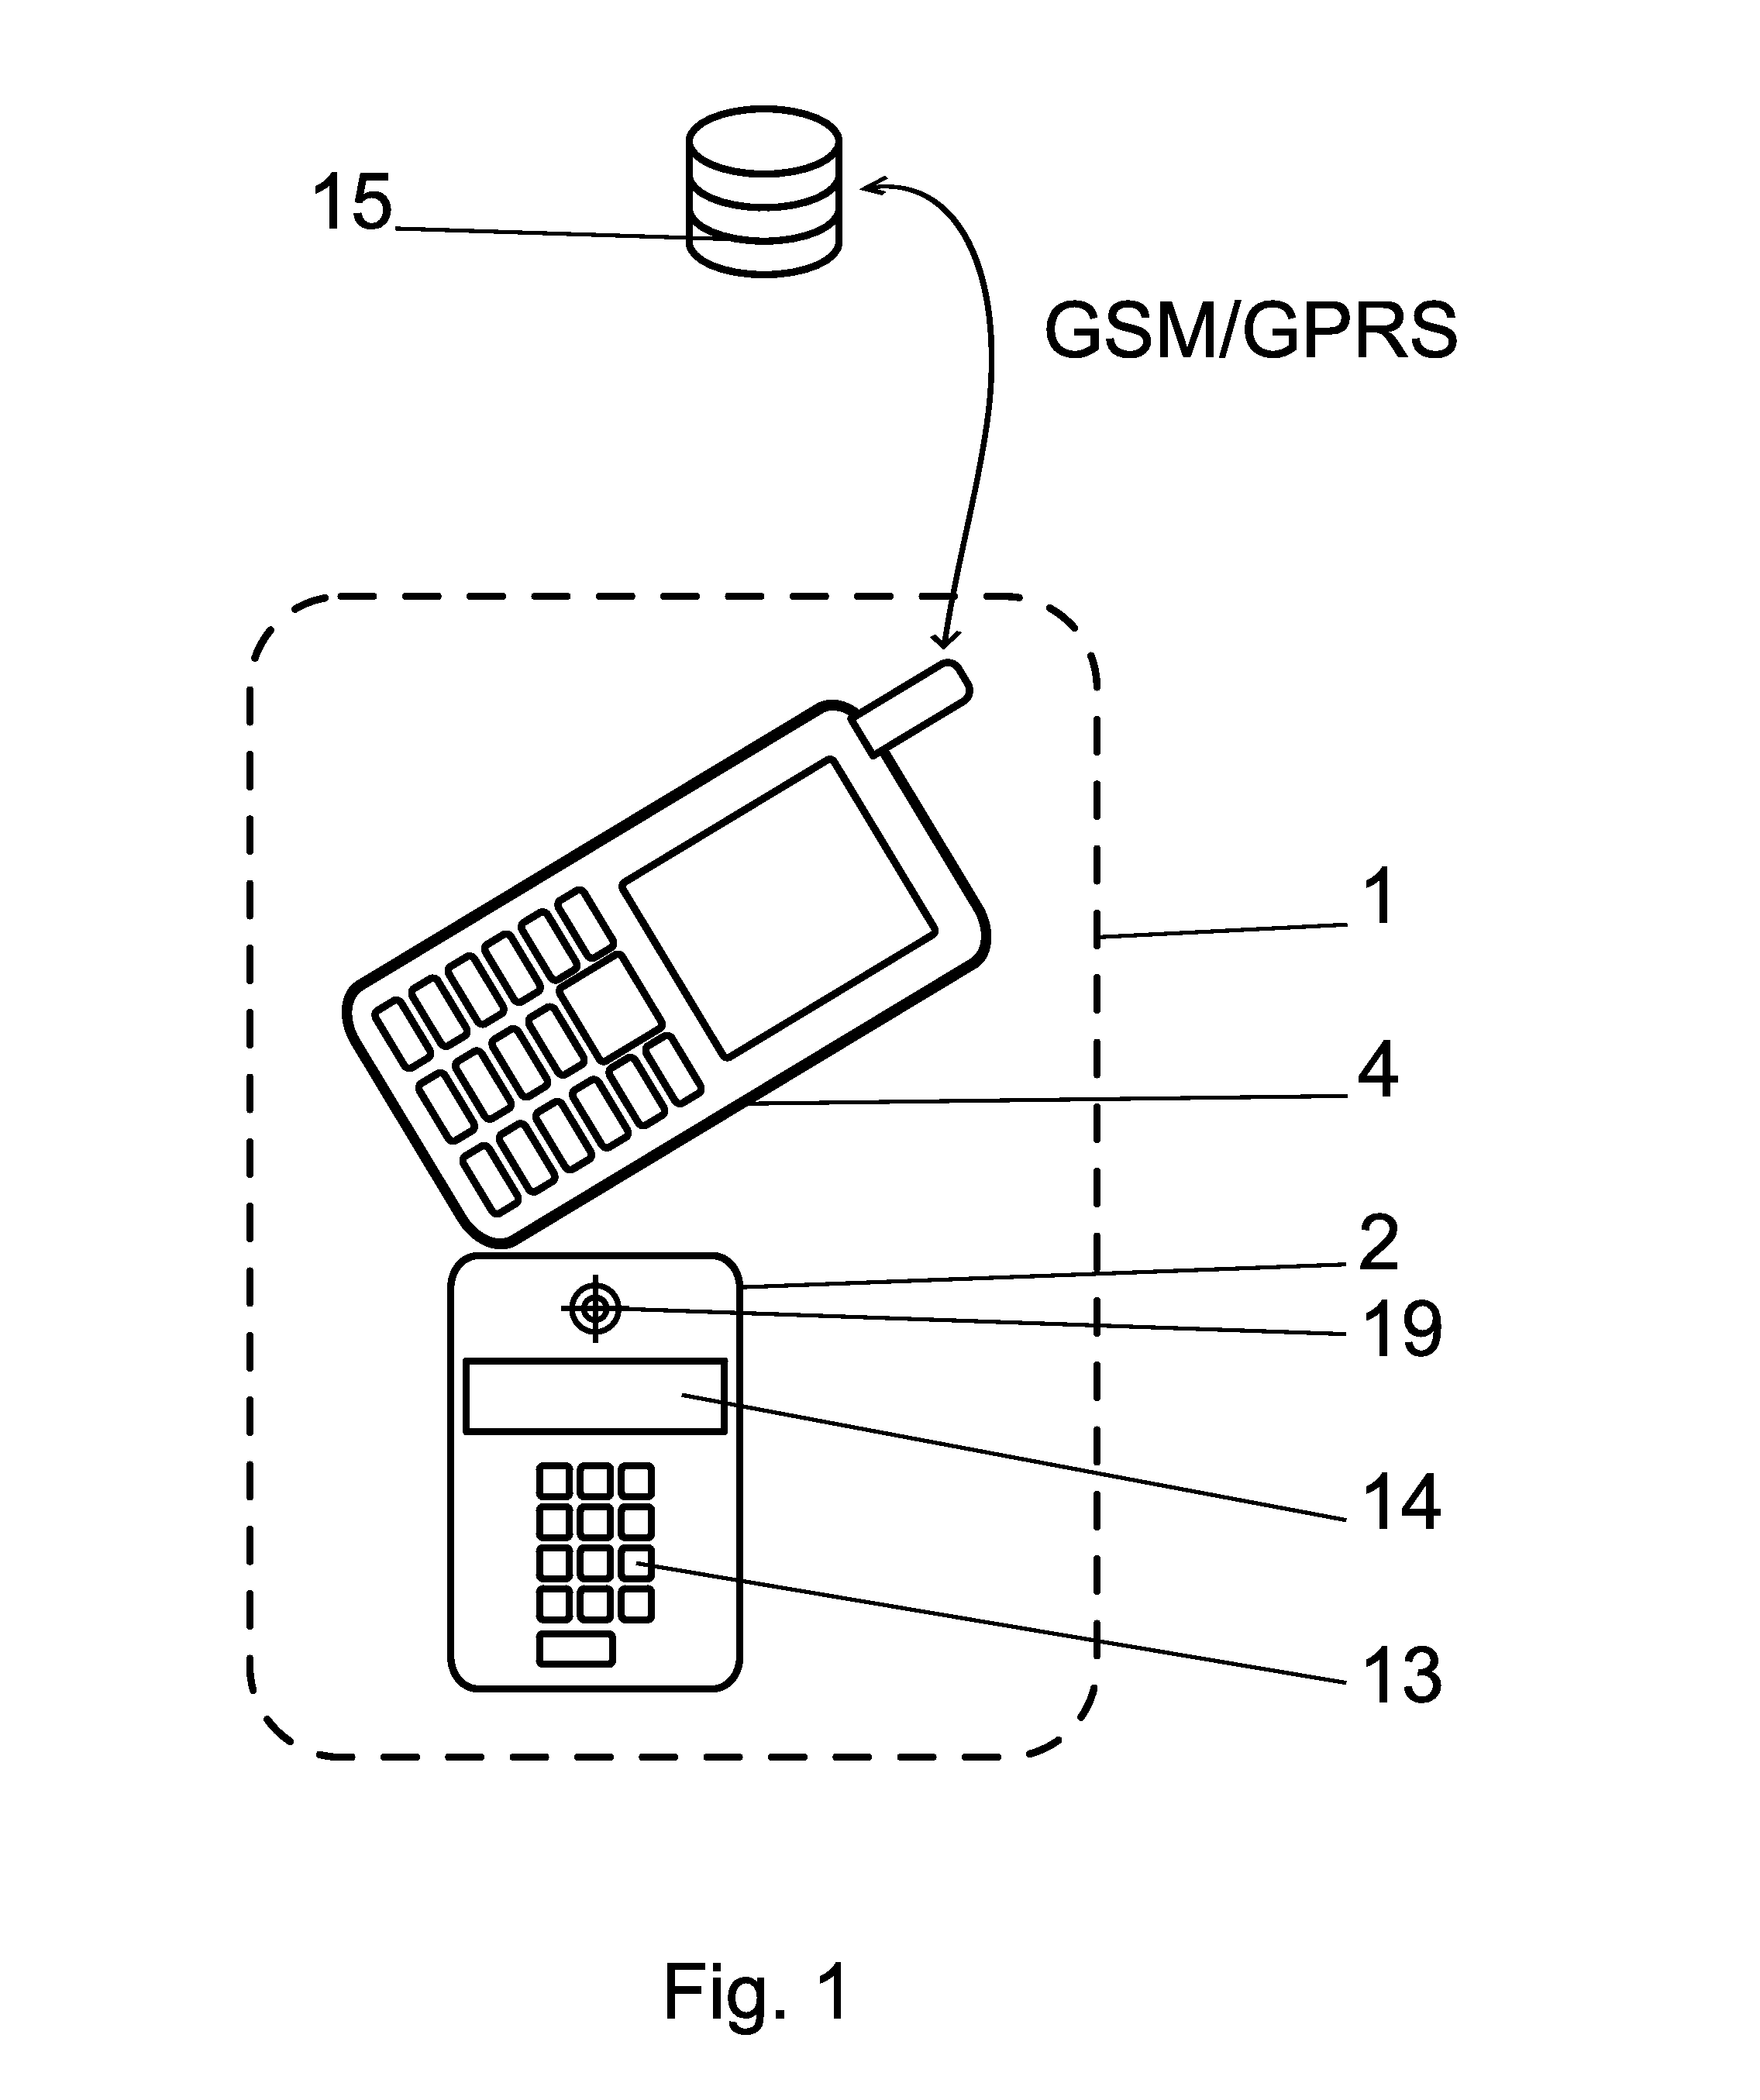 POS payment terminal and a method of direct debit payment transaction using a mobile communication device, such as a mobile phone